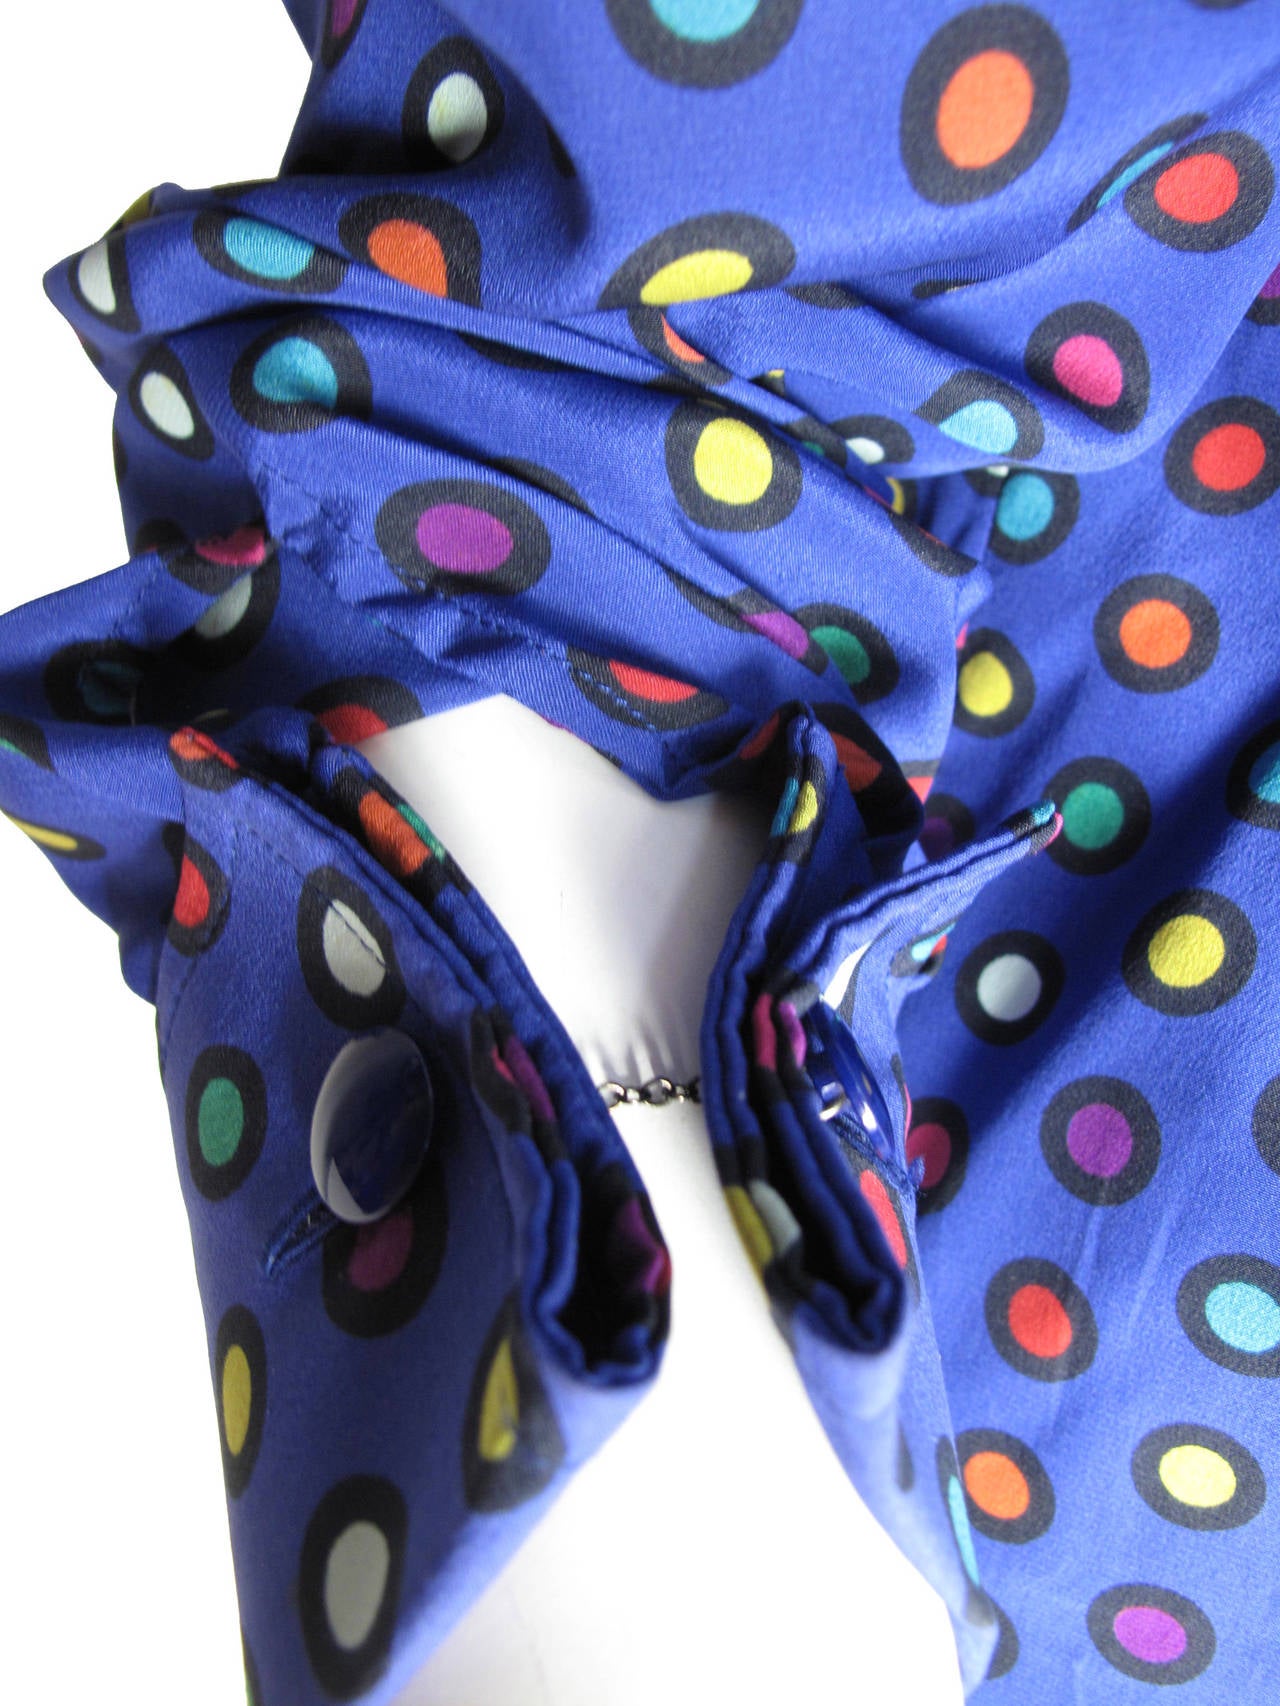 Valentino blue silk blouse with multi-colored polka dots.  40